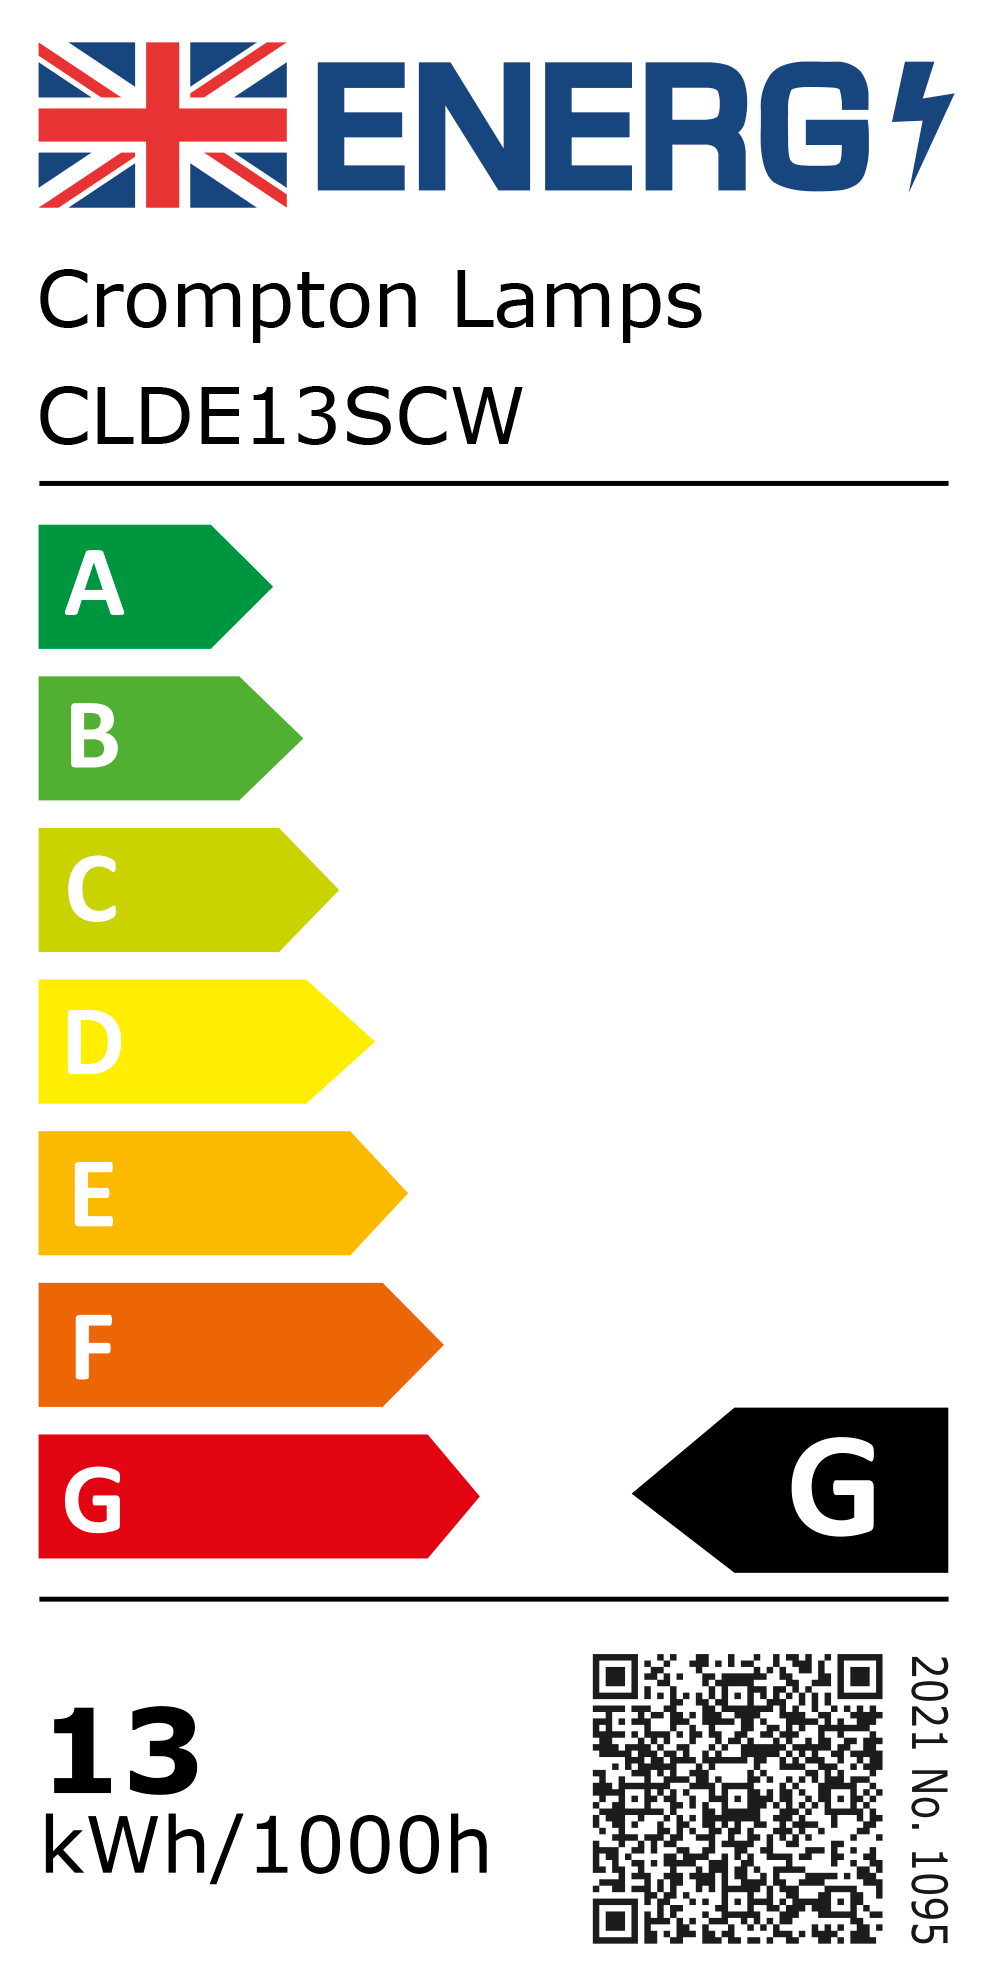 New 2021 Energy Rating Label: Stock Code CLDE13SCW